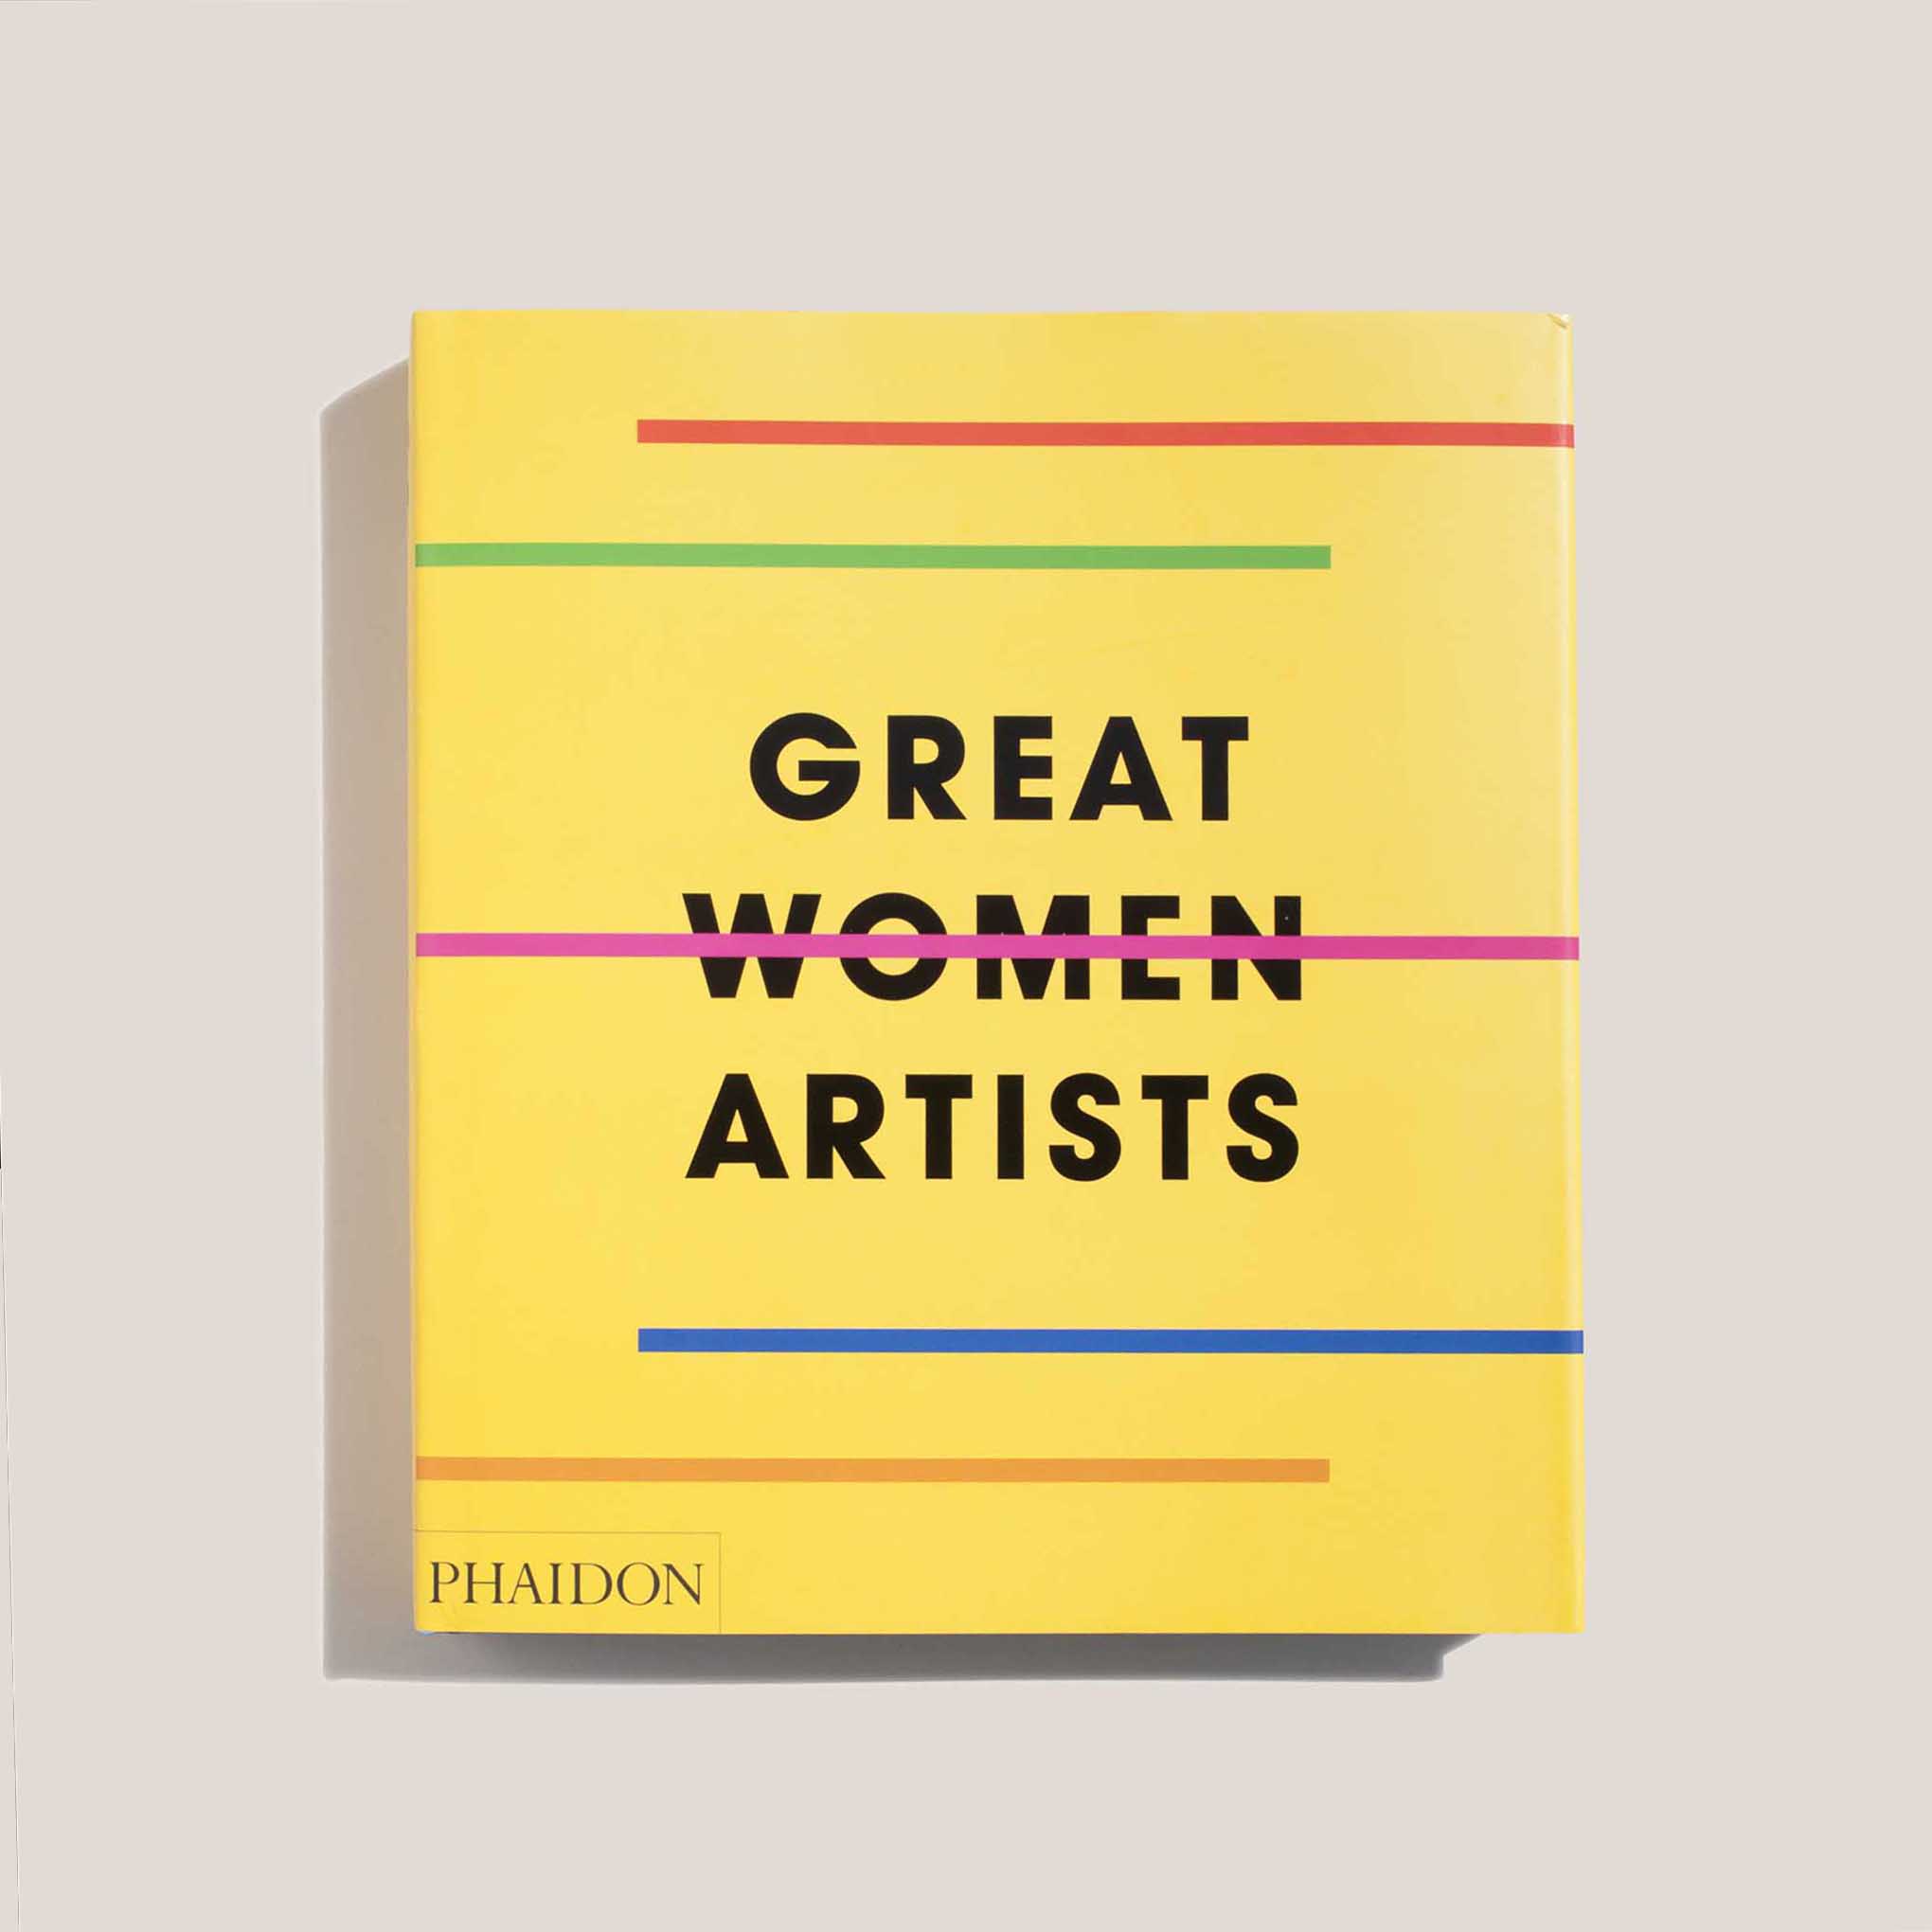 Photo of the cover of Great Woman Artists, available at LCD.